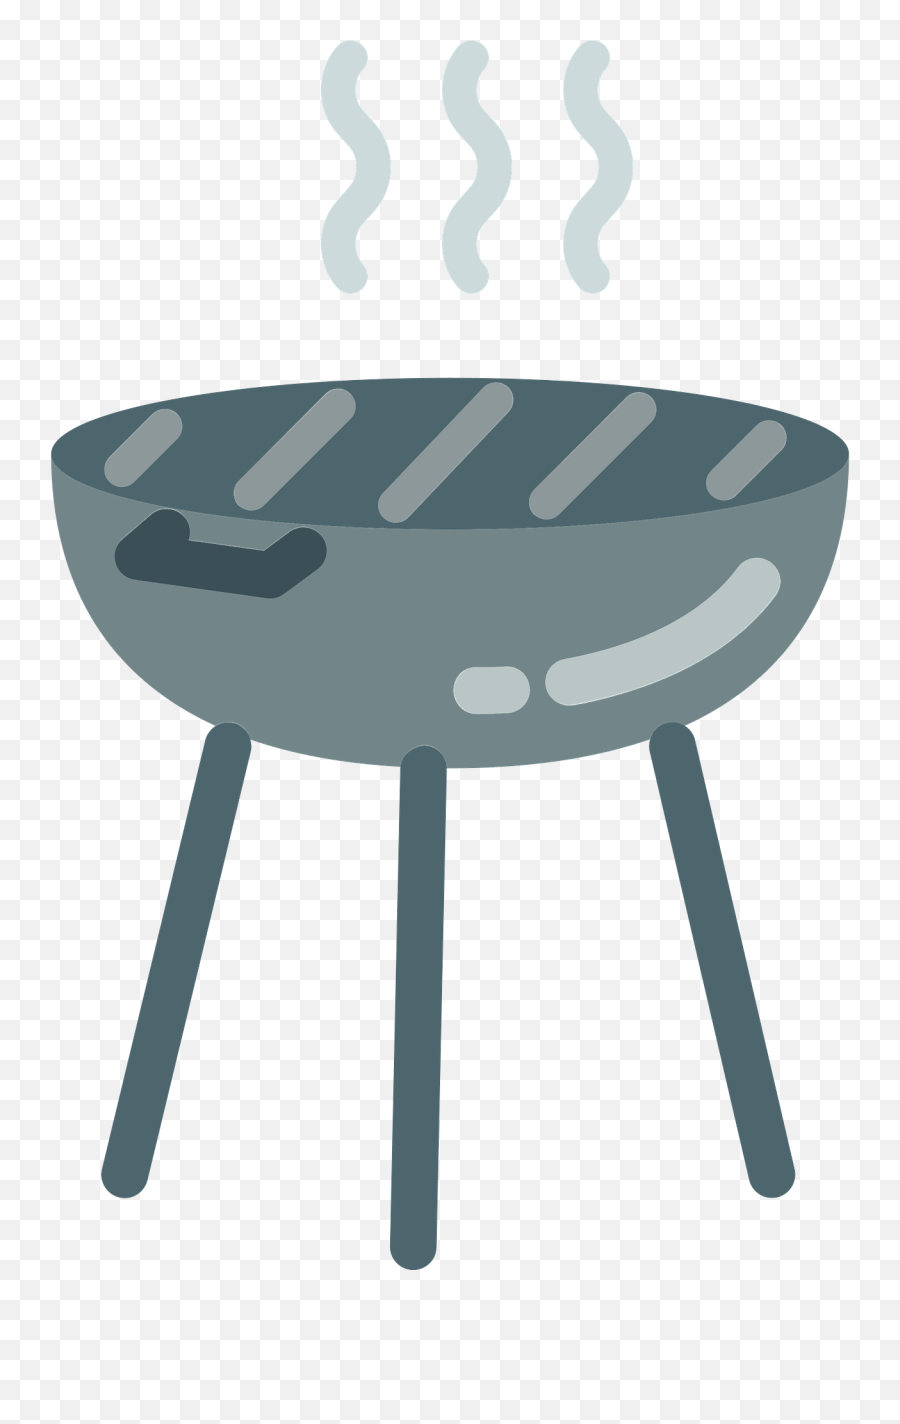 Grill Clipart - Outdoor Grill Rack Topper Emoji,Grill Clipart